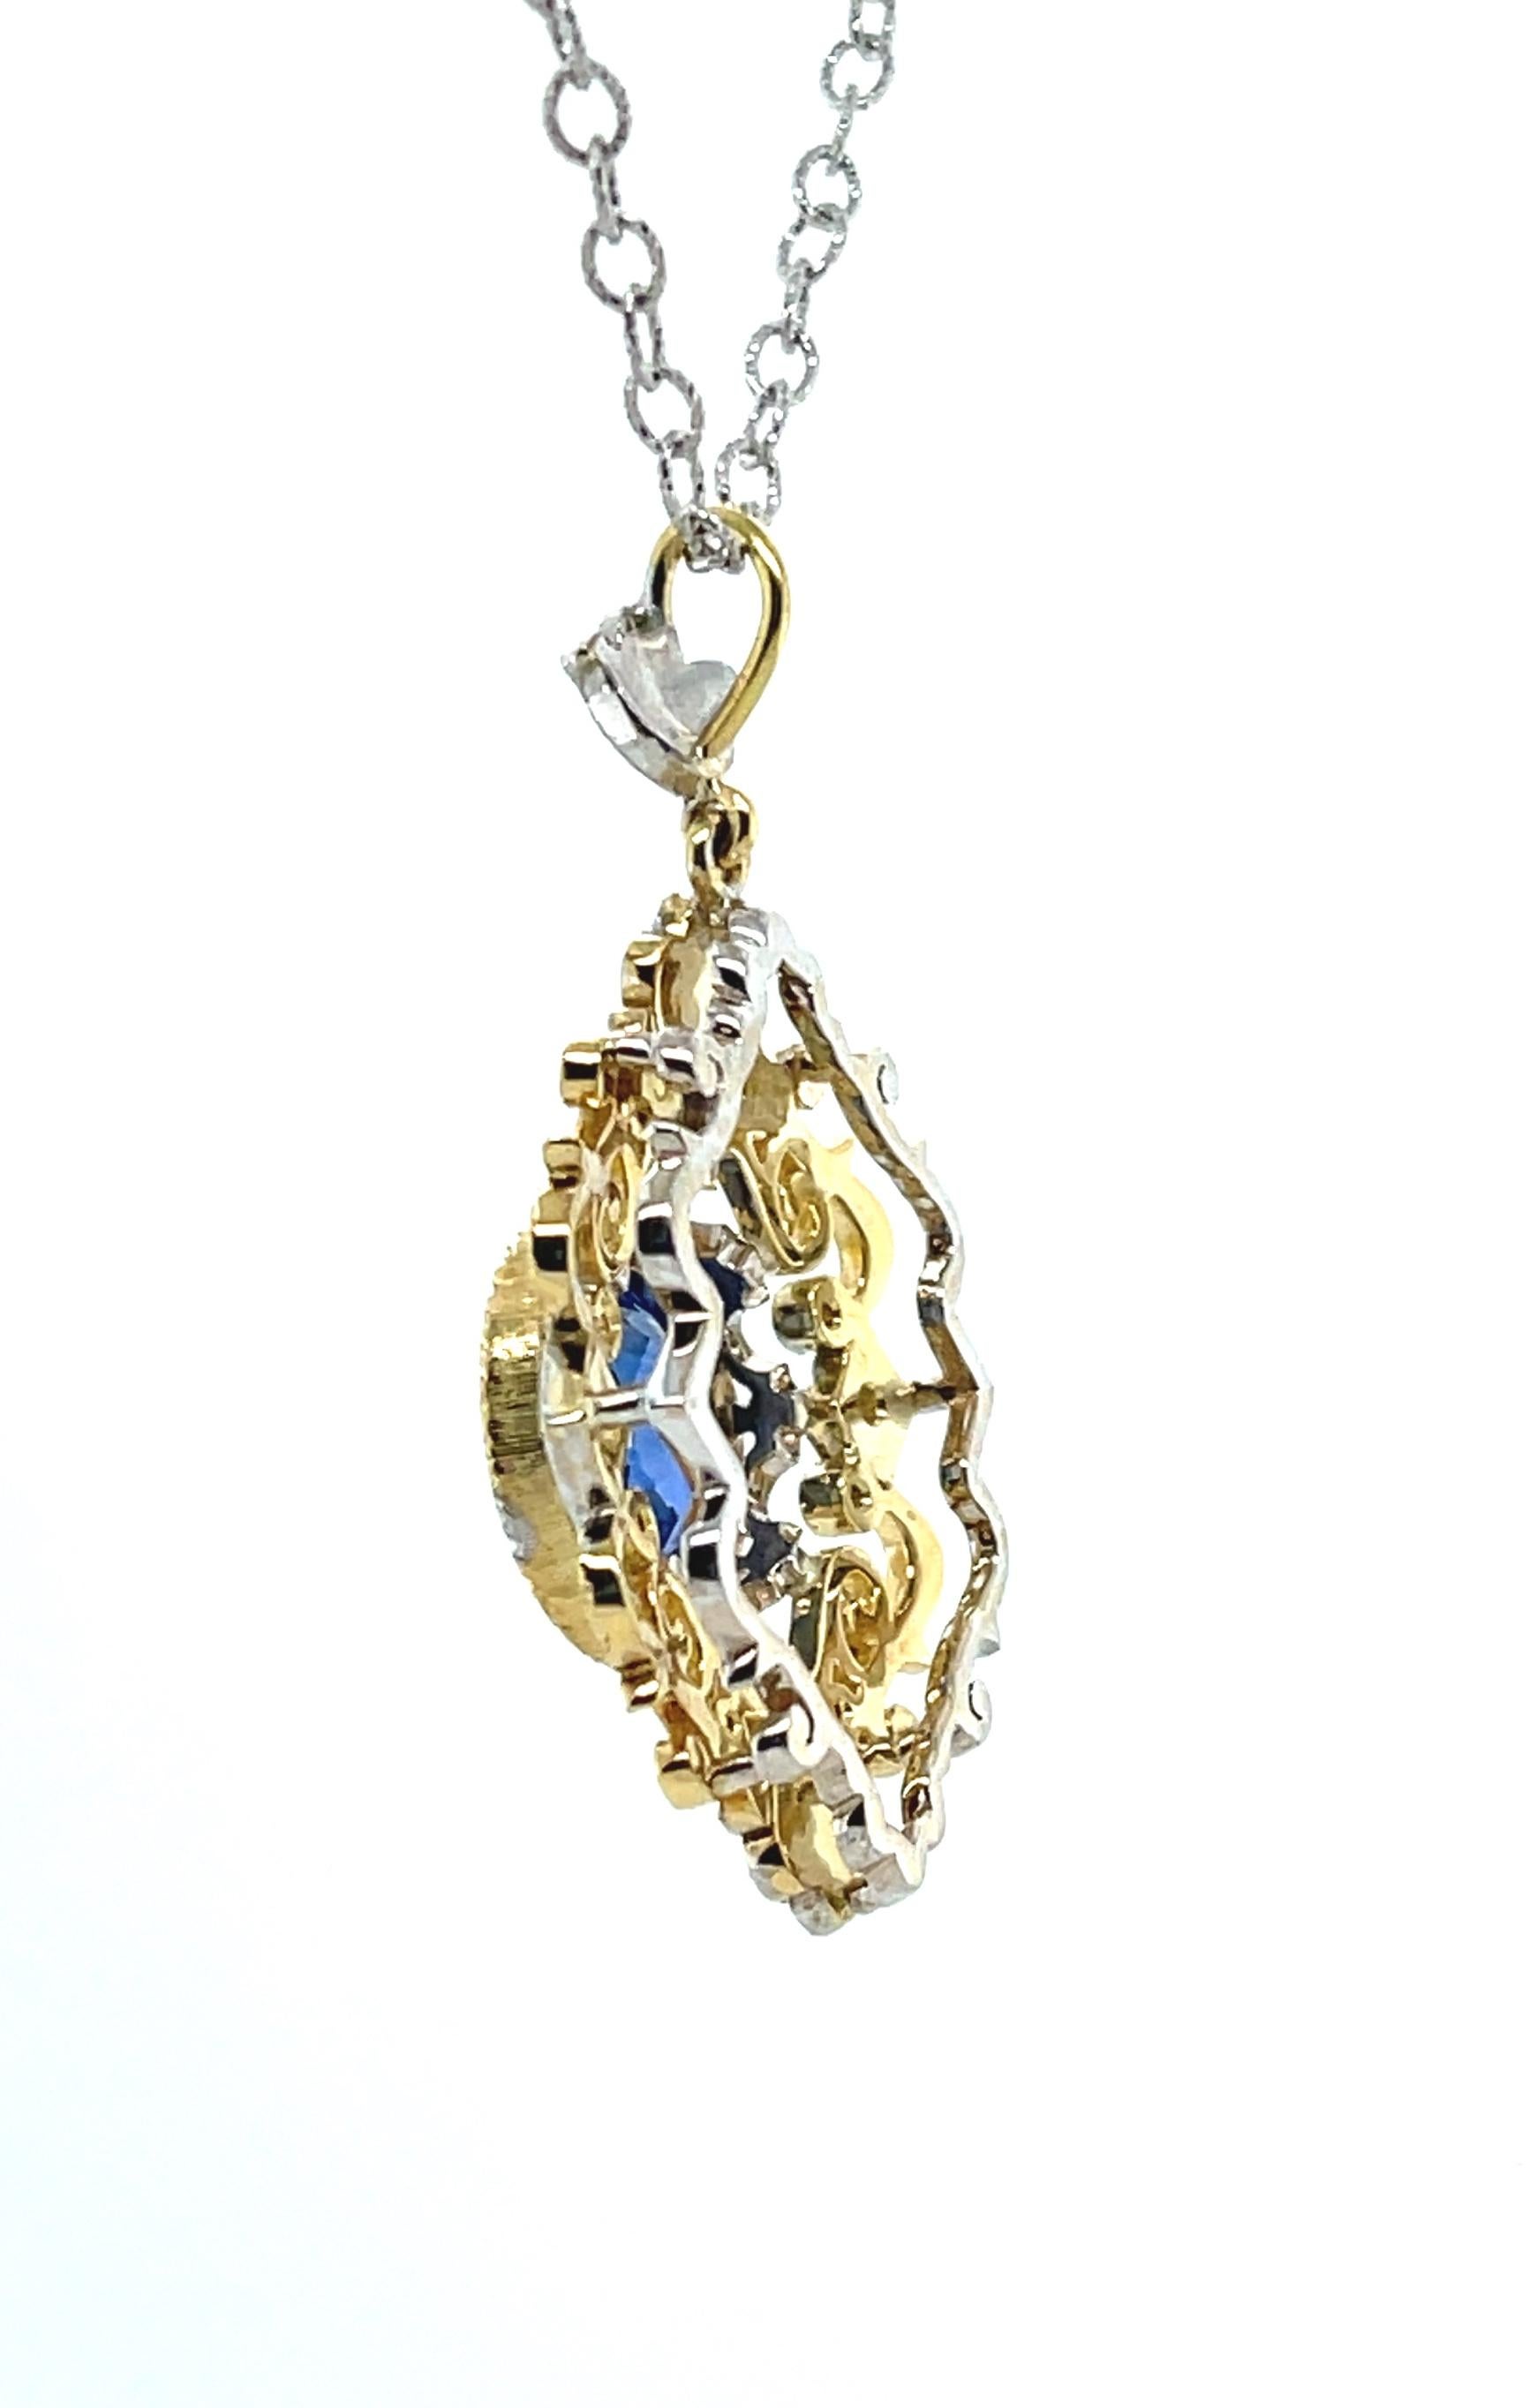 Oval Cut Cornflower Blue Sapphire and Diamond Victorian Style Necklace in 18k Yellow Gold